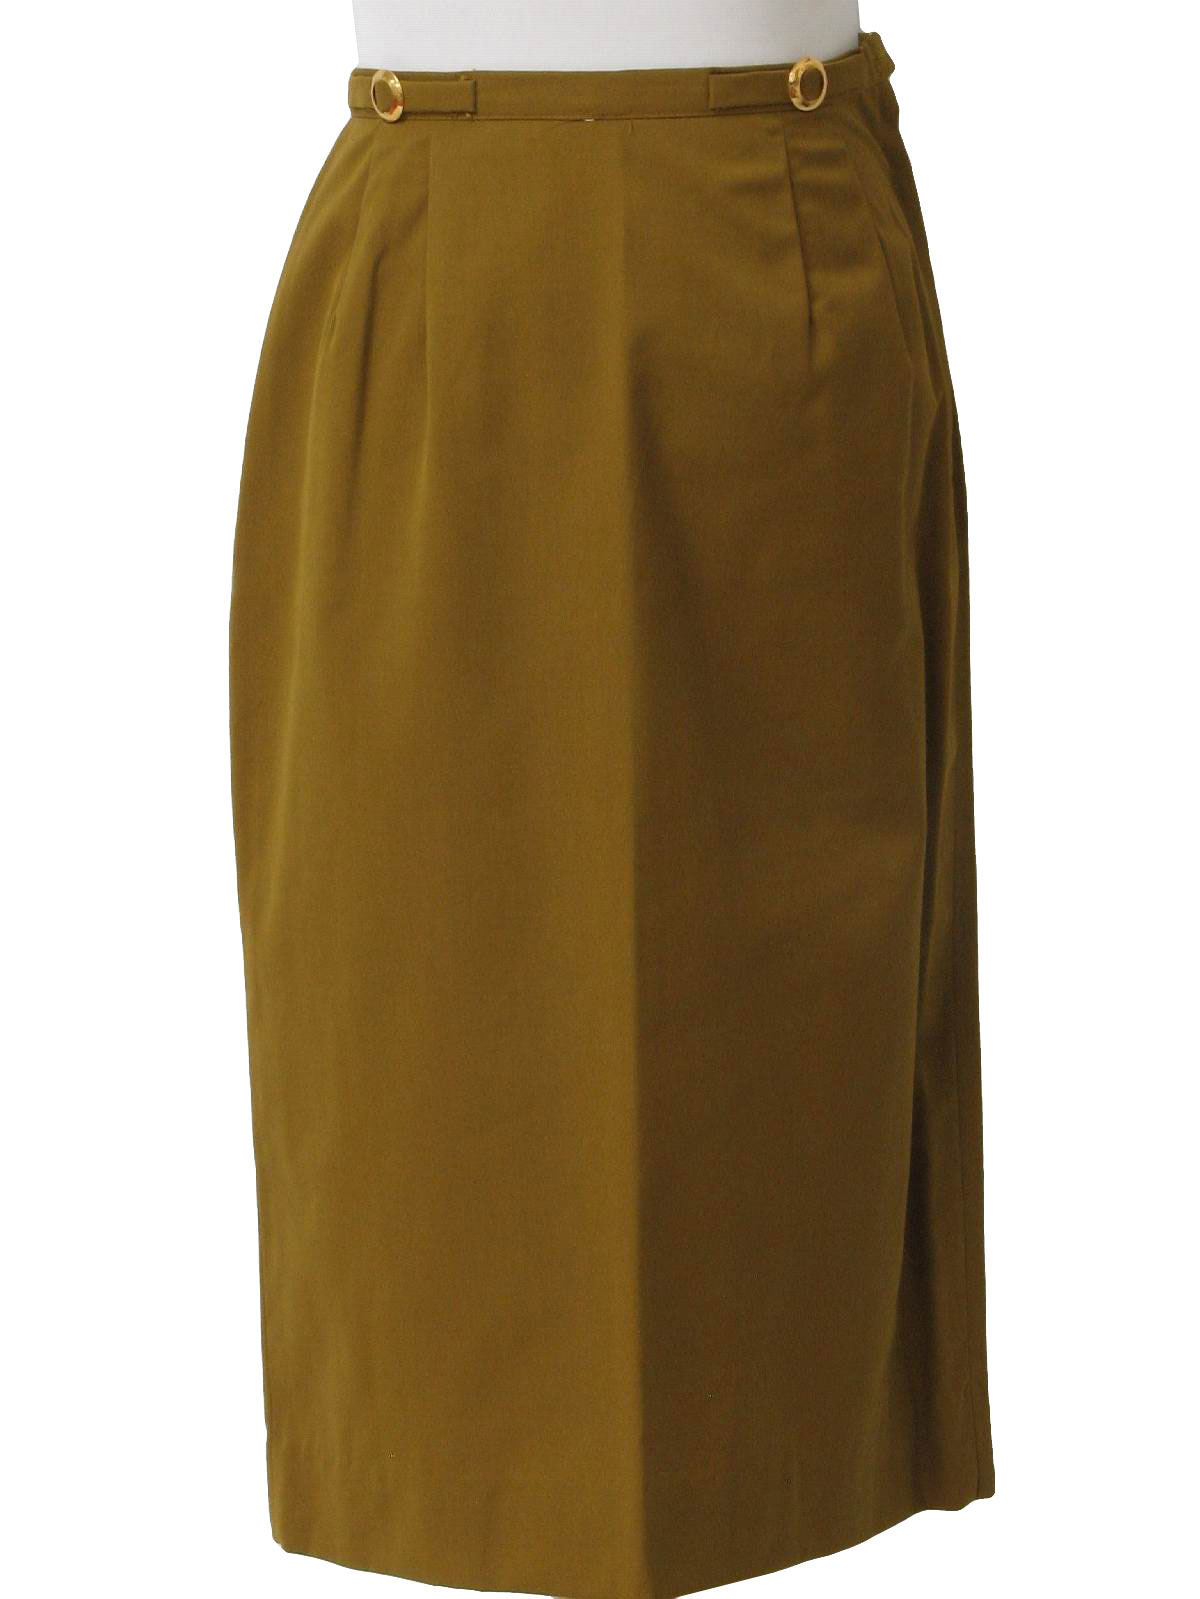 Retro 60's Skirt: Late 50s/Early 60s -No Label- Womens warm tan cotton ...